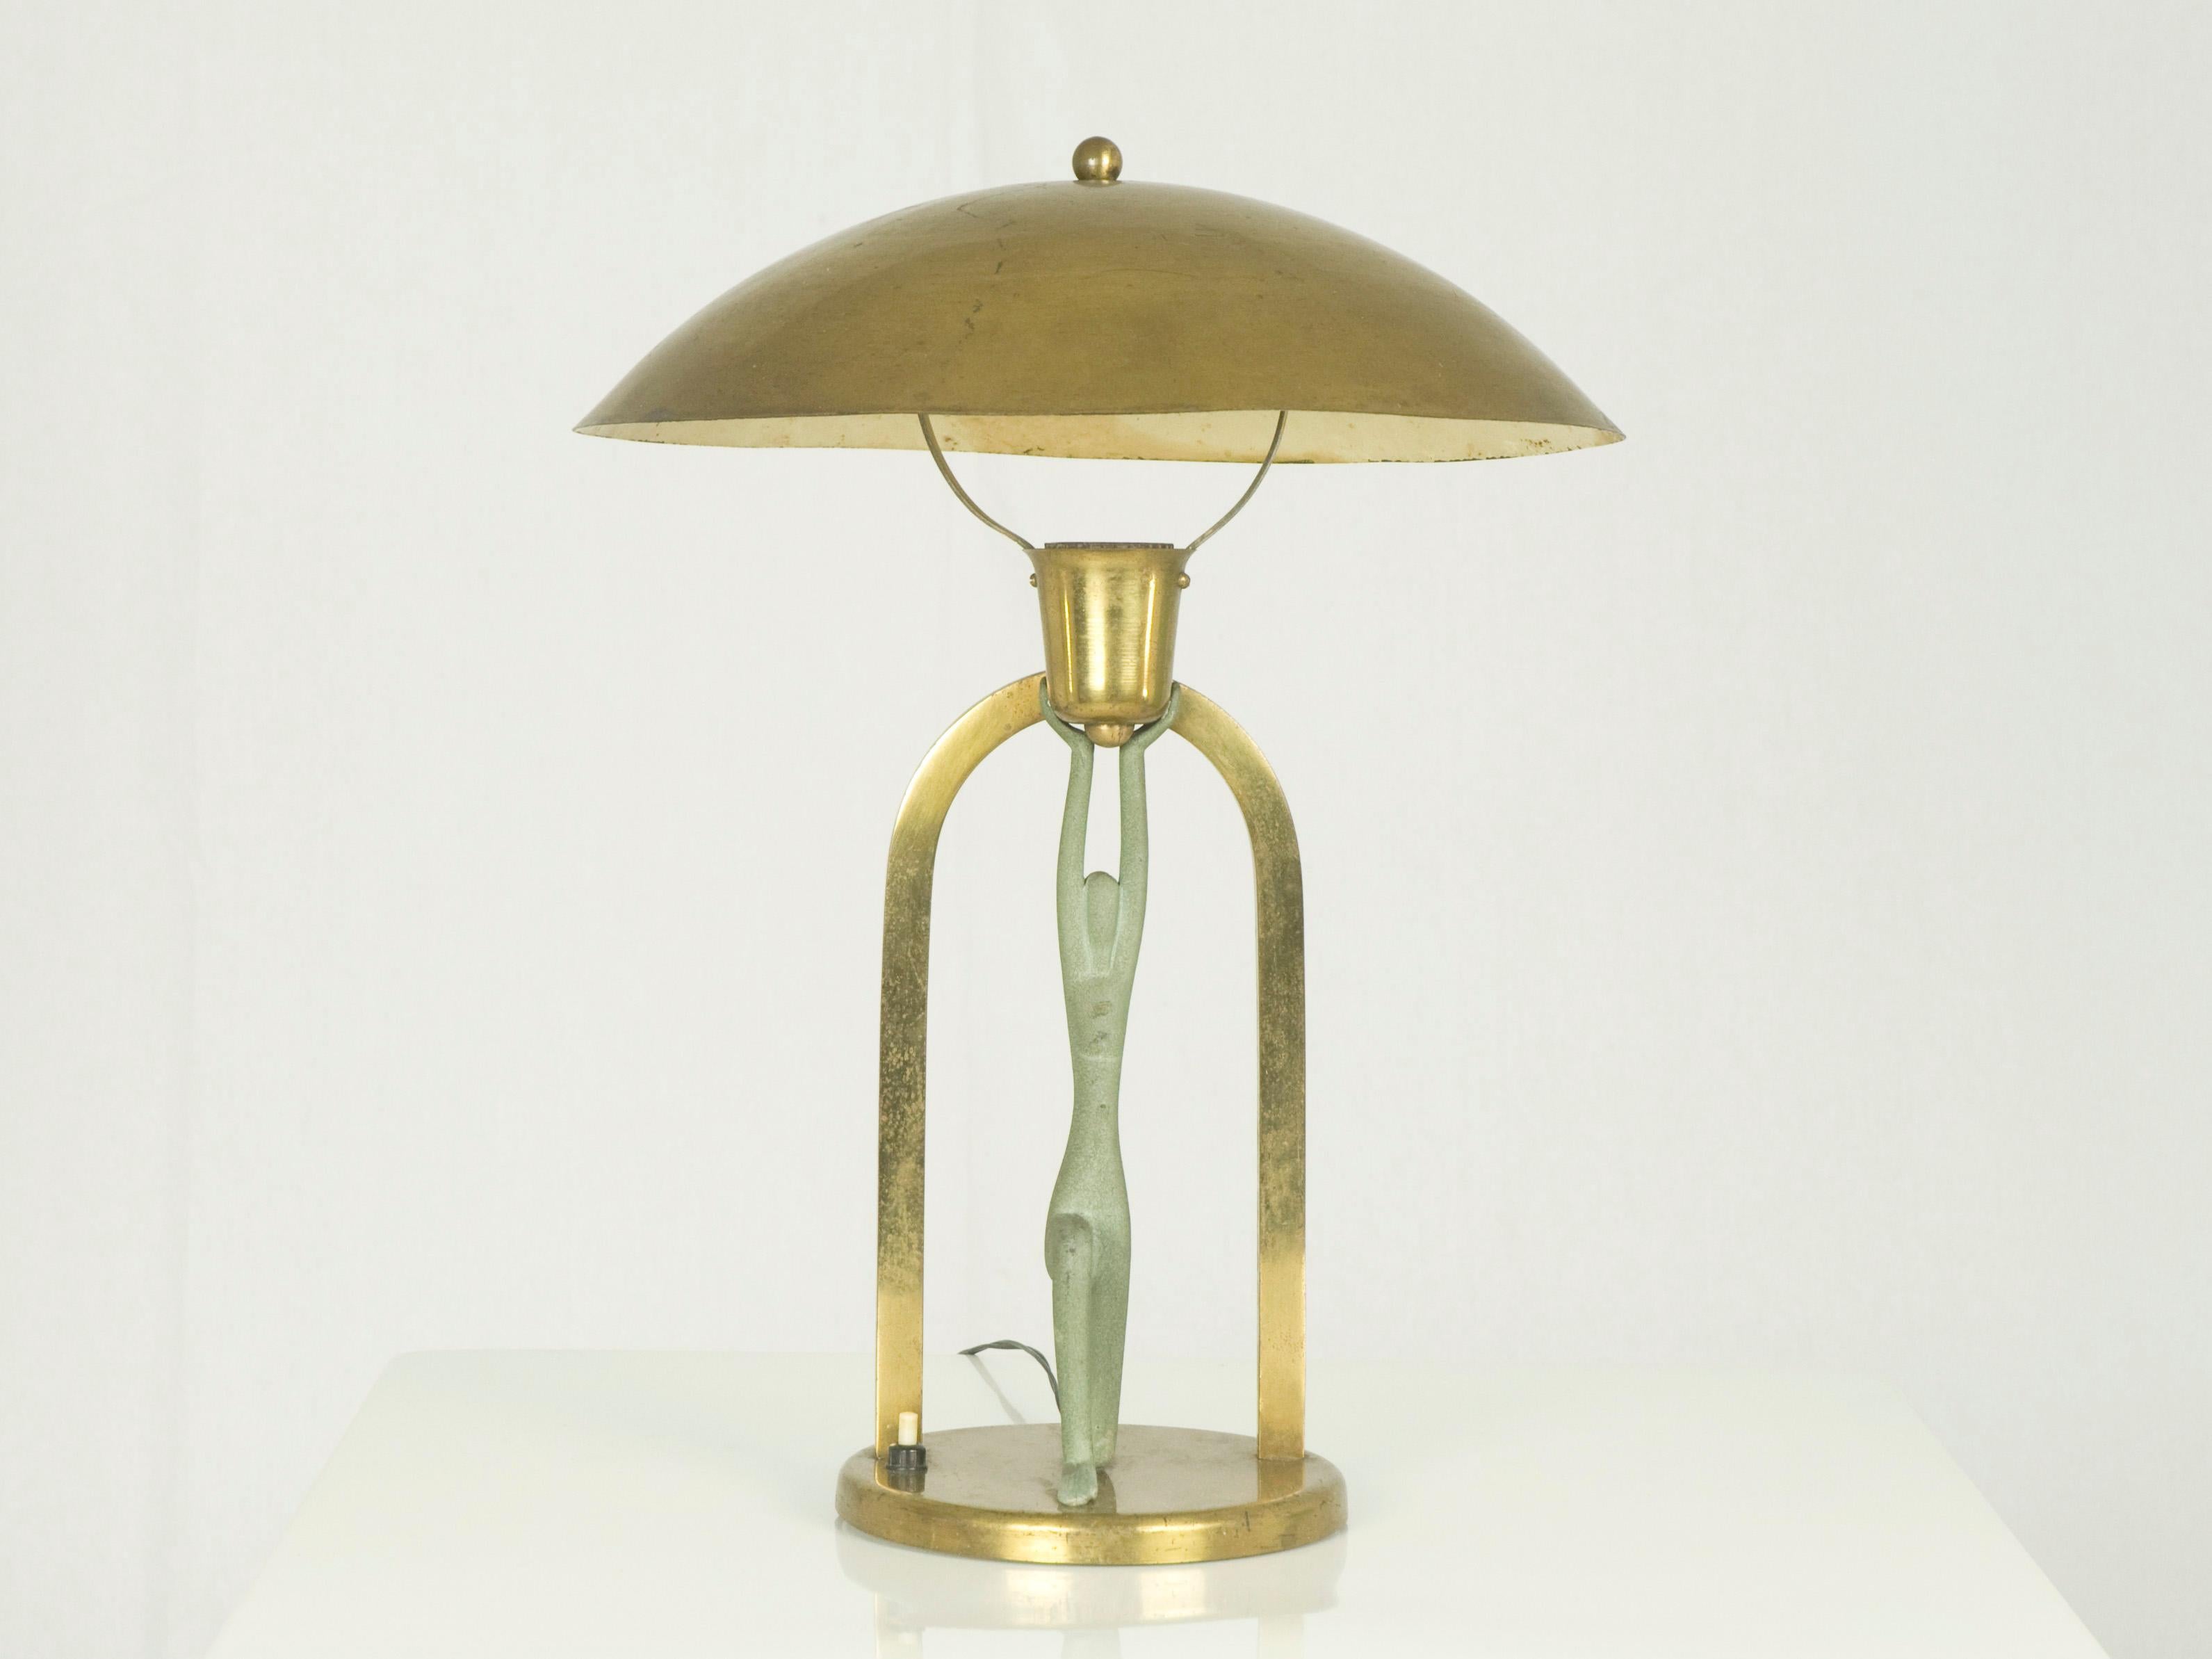 This unusual table lamp was produced in Italy around 1930-40s. It is made from painted and polished brass with a female figure which supports the lamp shade.
It remains in a good vintage condition: wear consistent with age and use; some paint